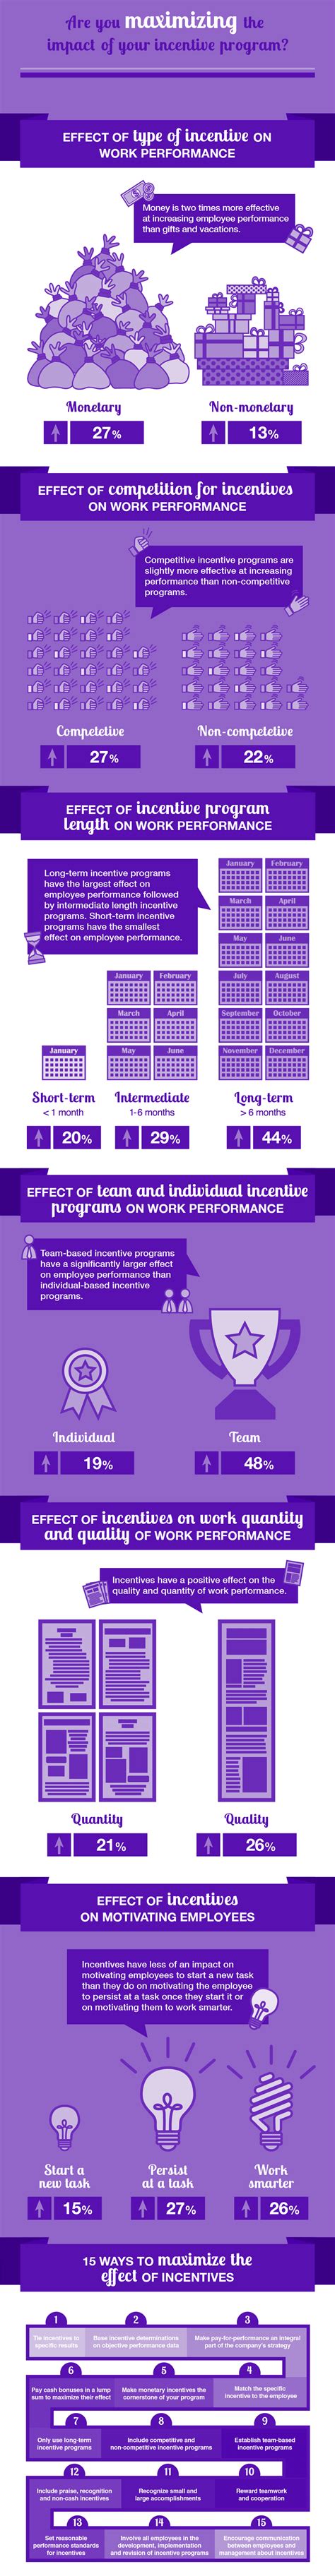 The Guide to Employee Incentives - Infographics | Talkdesk